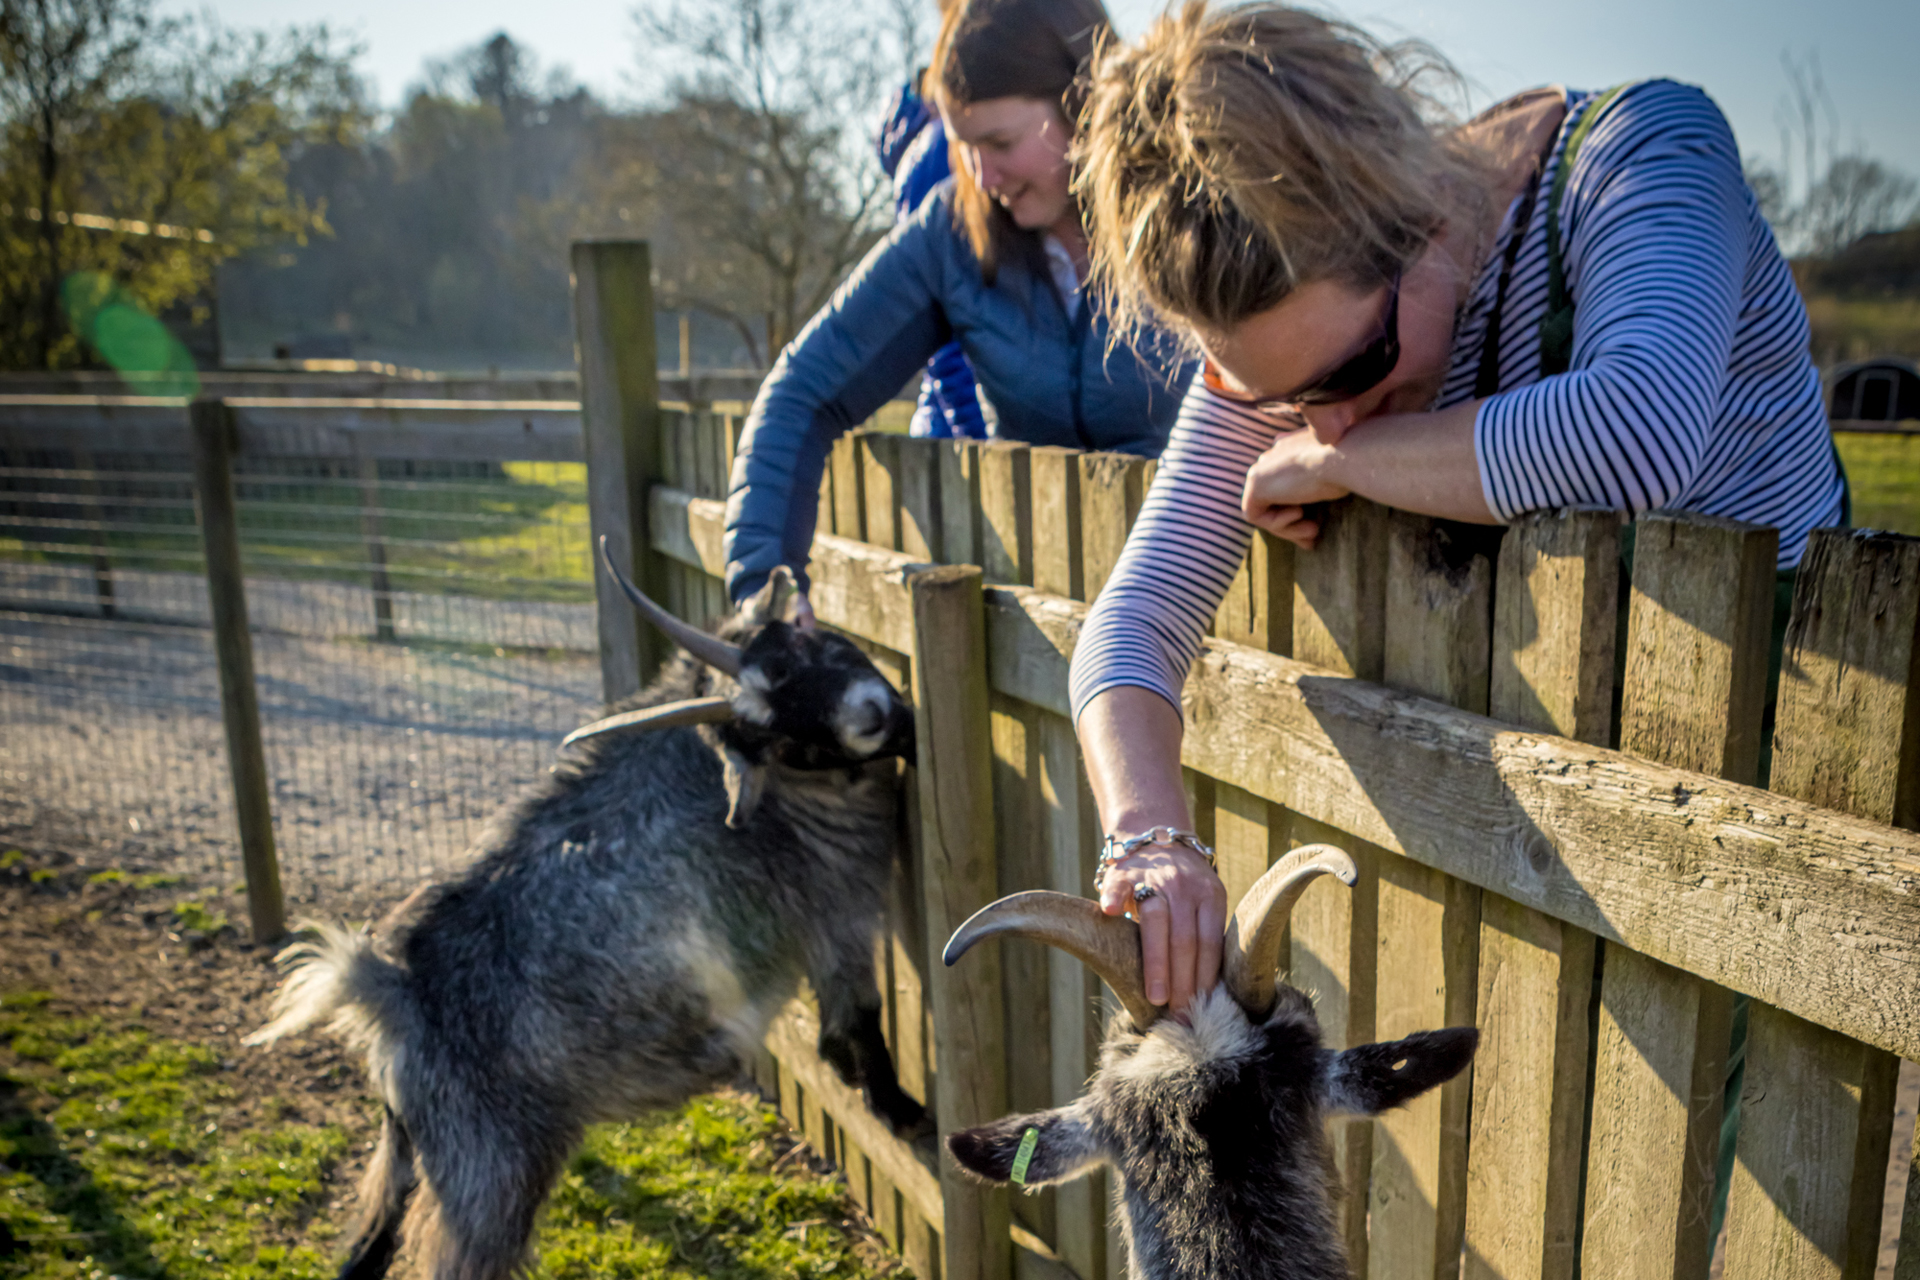 Two people petting farm animals over a fence